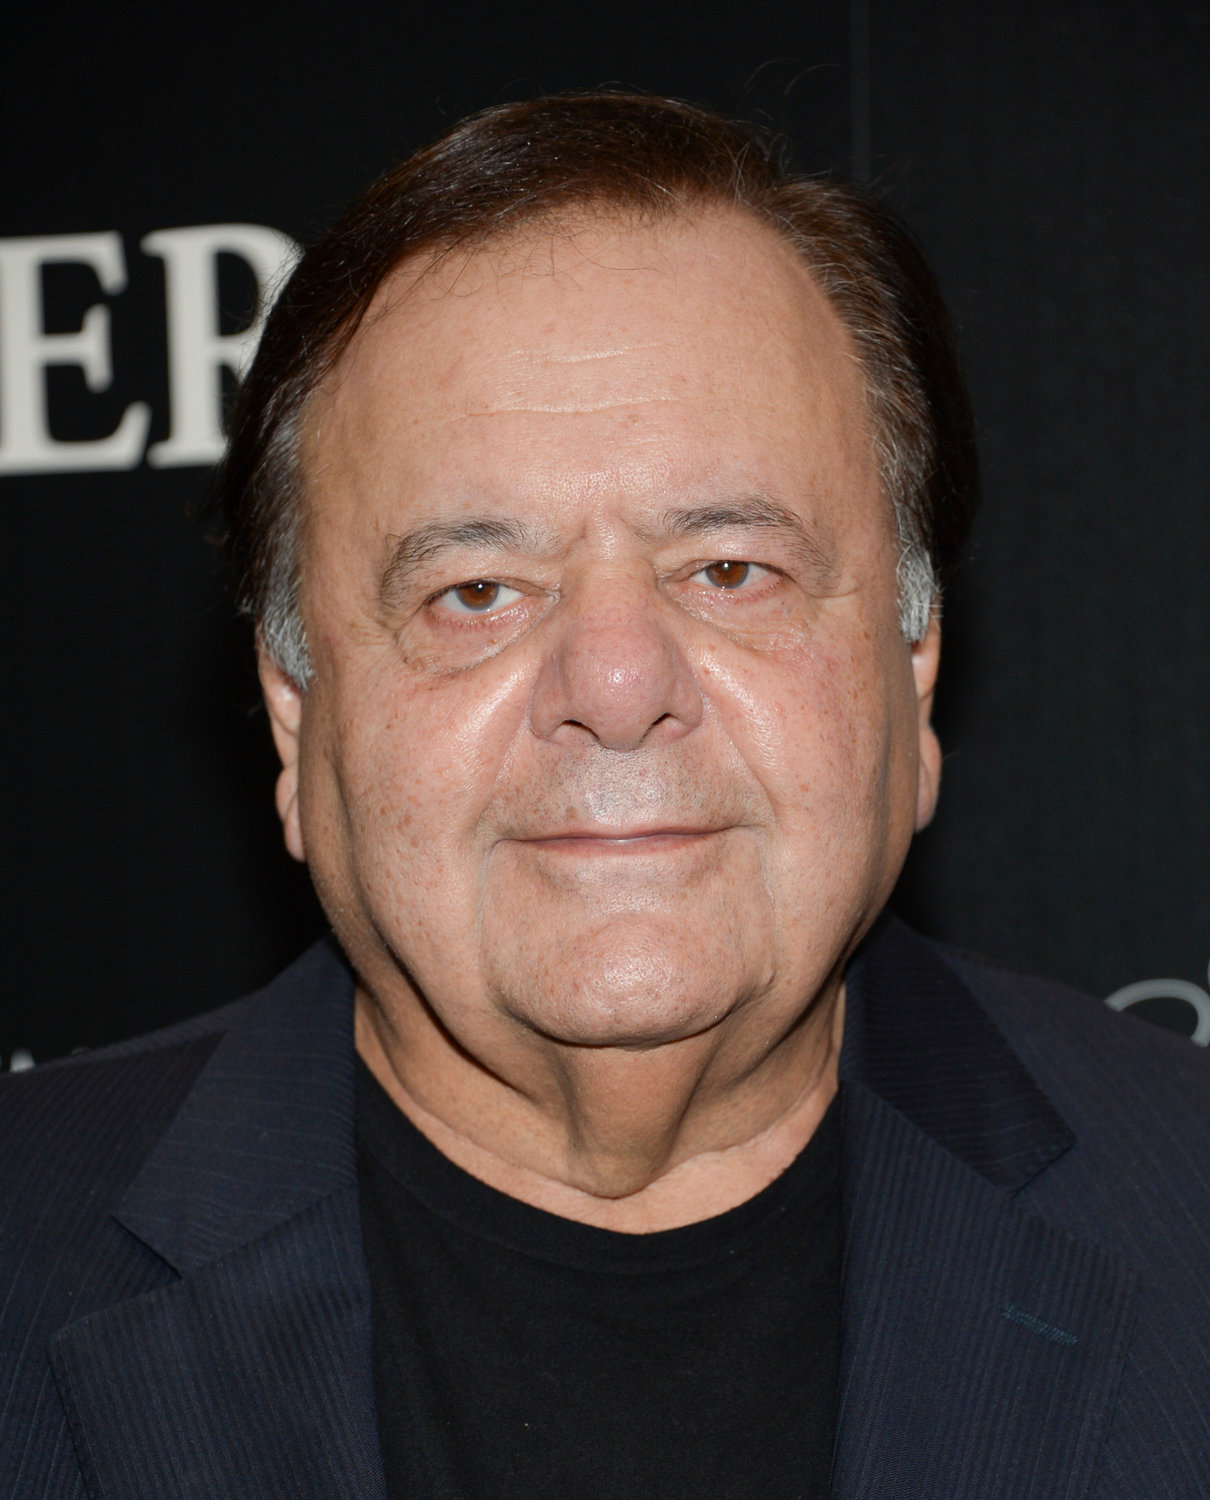 FILE - Paul Sorvino attends a special screening of "Foxcatcher", hosted by the Cinema Society with Details and Brooks Brothers, at The Museum of Modern Art on Tuesday, Nov. 11, 2014, in New York. Sorvino, an imposing actor who specialized in playing crooks and cops like Paulie Cicero in ‚ÄúGoodfellas‚Äù and the NYPD sergeant Phil Cerretta on ‚ÄúLaw &amp; Order,‚Äù has died. He was 83. (Photo by Evan Agostini/Invision/AP, File)